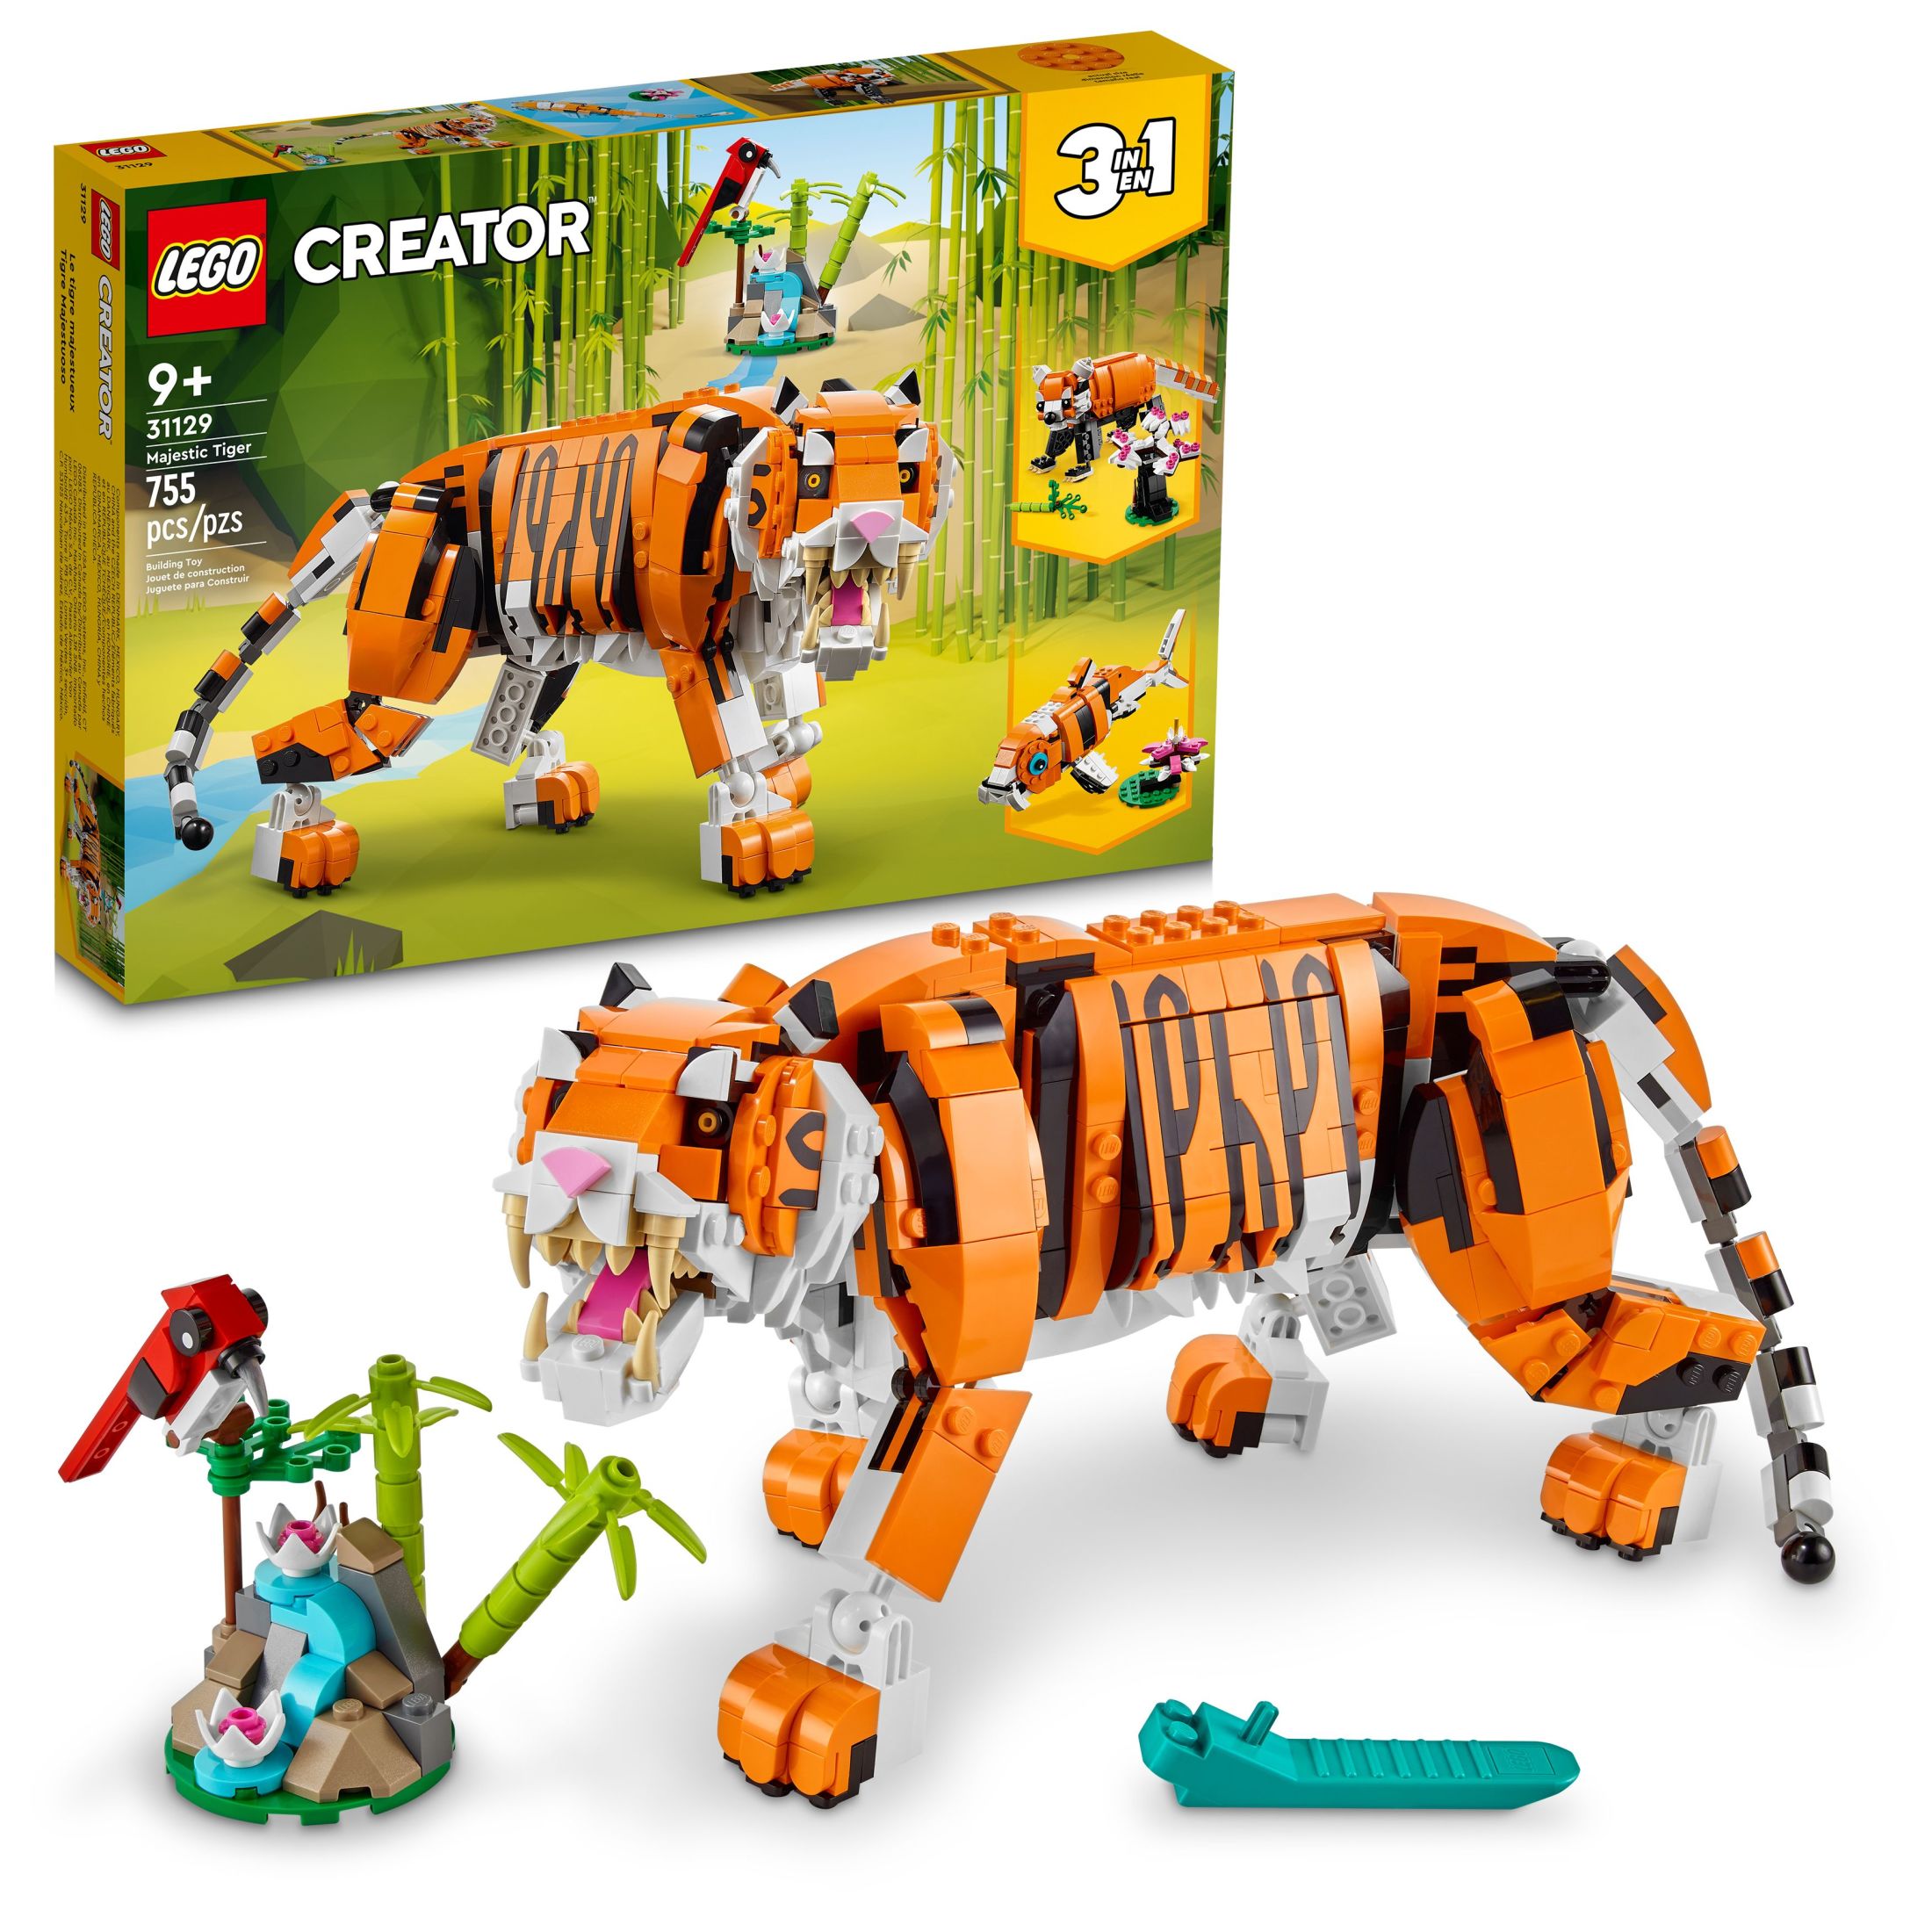 LEGO Creator 3 in 1 Majestic Tiger Building Set, Transforms from Tiger to Panda or Koi Fish Set, Animal Figures, Collectible Building Toy, Gifts for Kids, Boys & Girls 9 Plus Years Old, 31129 - image 1 of 9